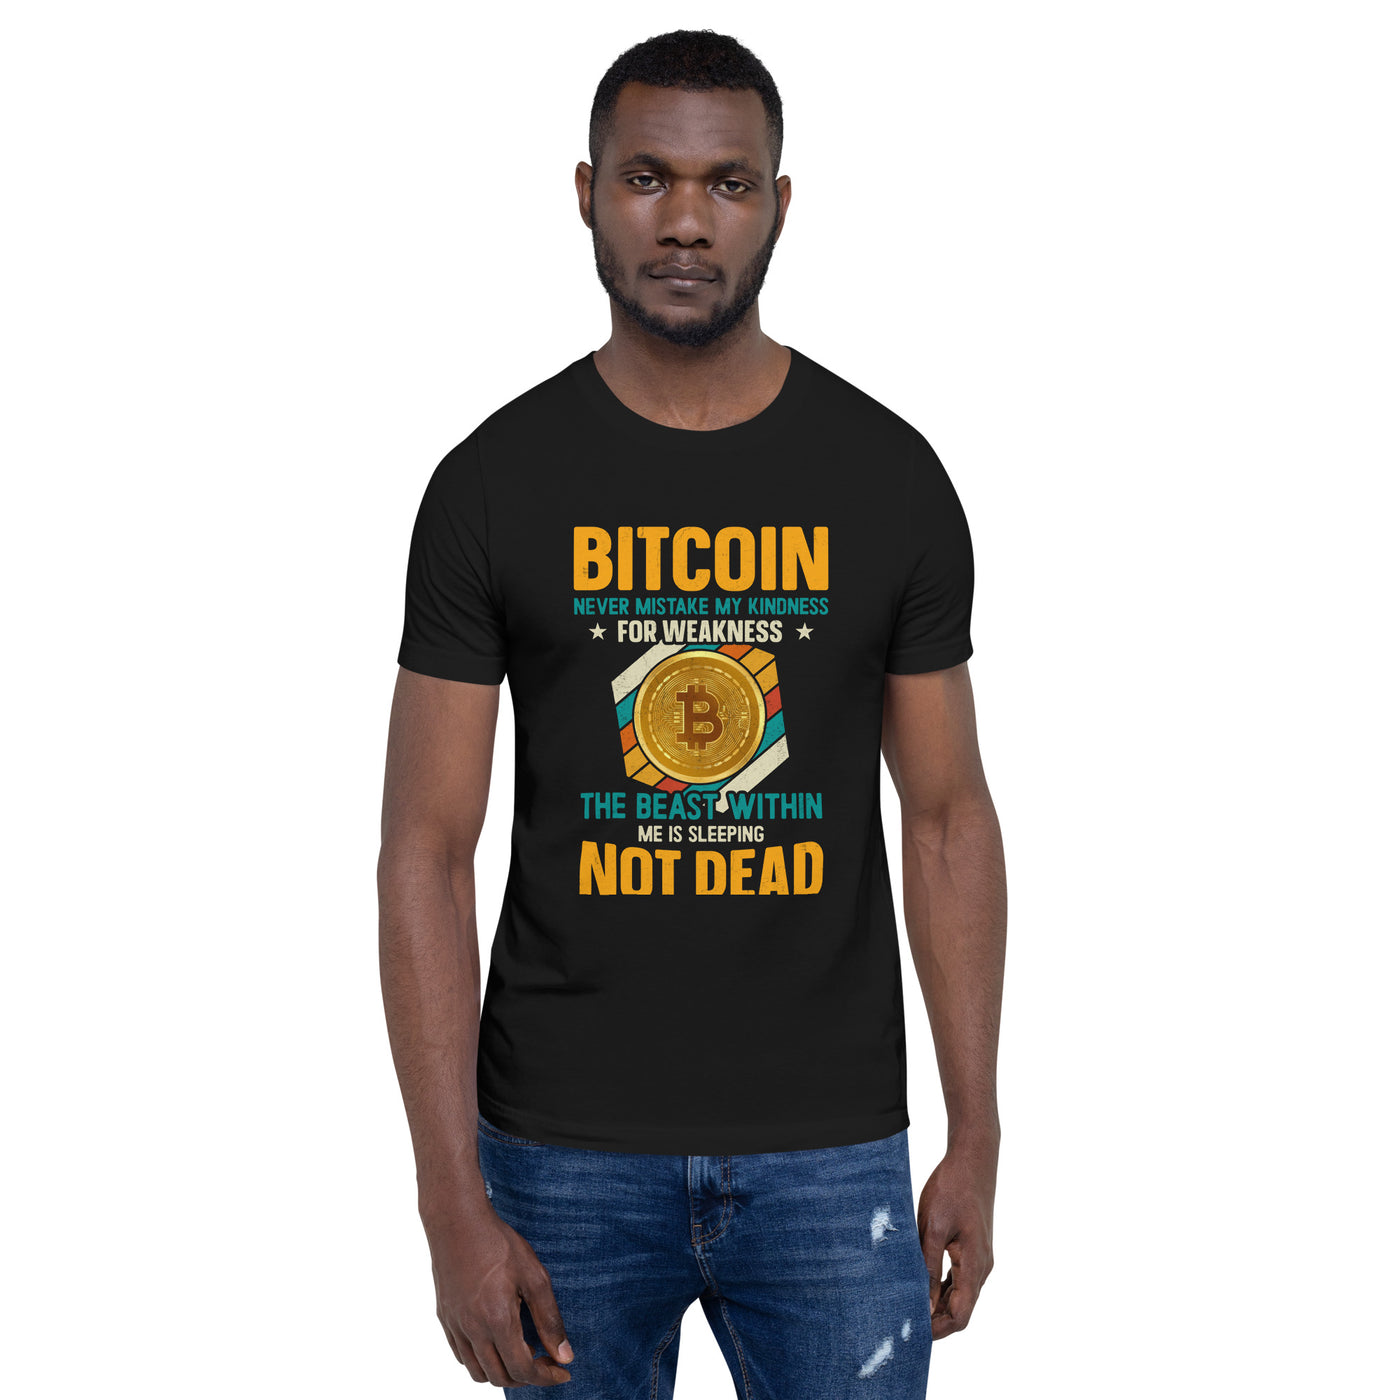 Bitcoin : Never Mistake my Kindness for Weakness - Unisex t-shirt